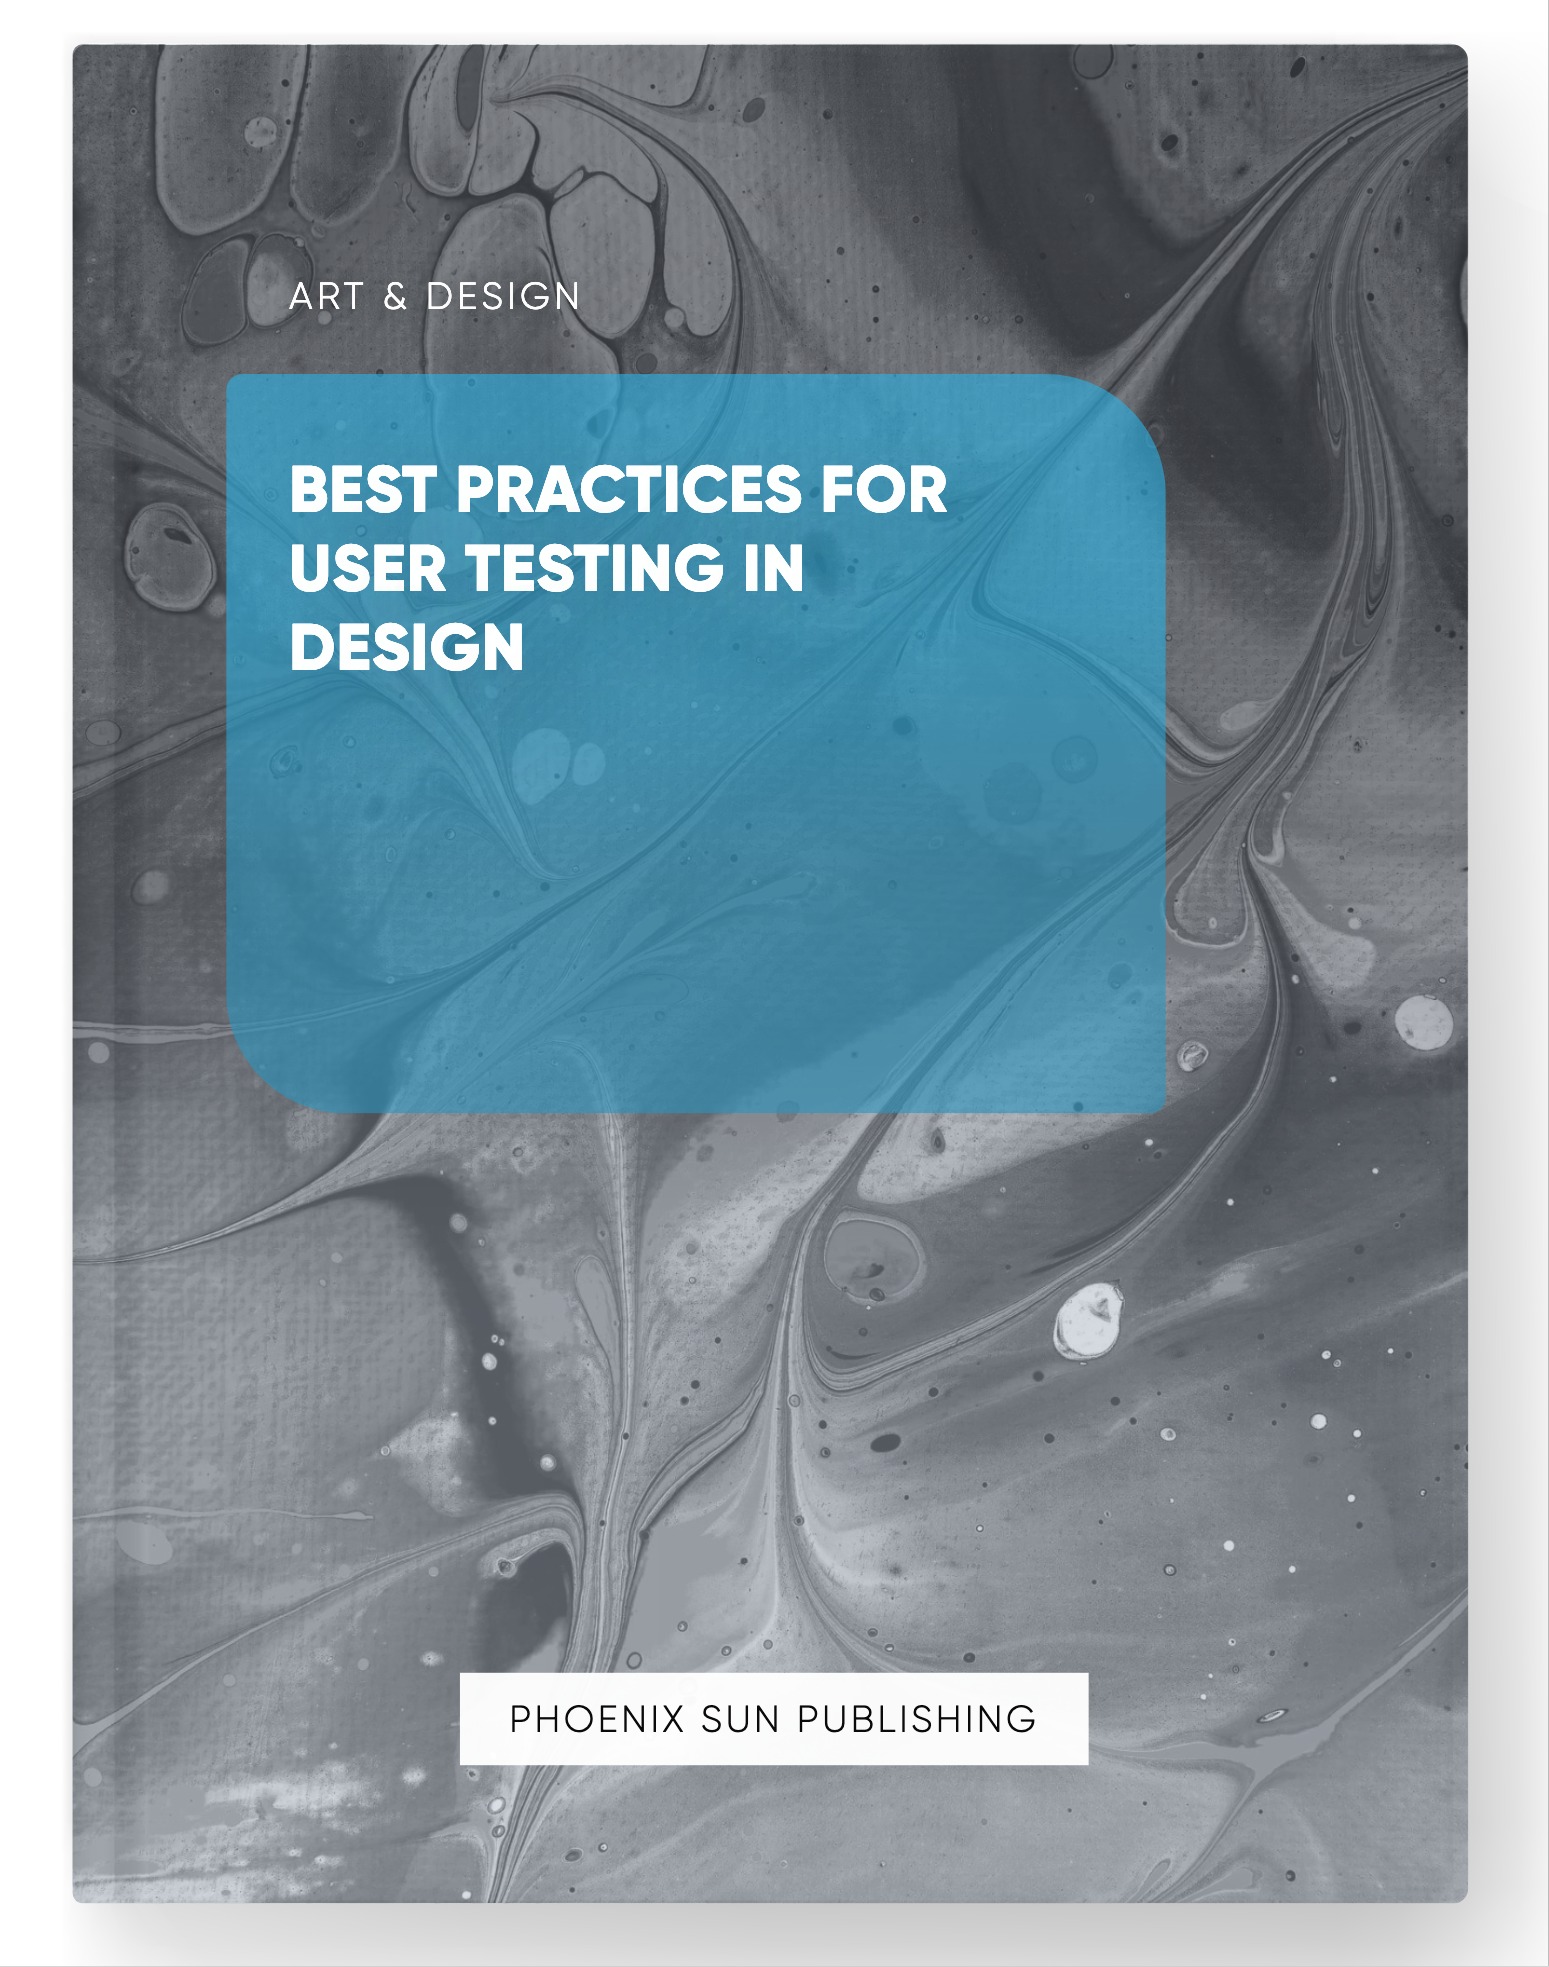 Best Practices for User Testing in Design